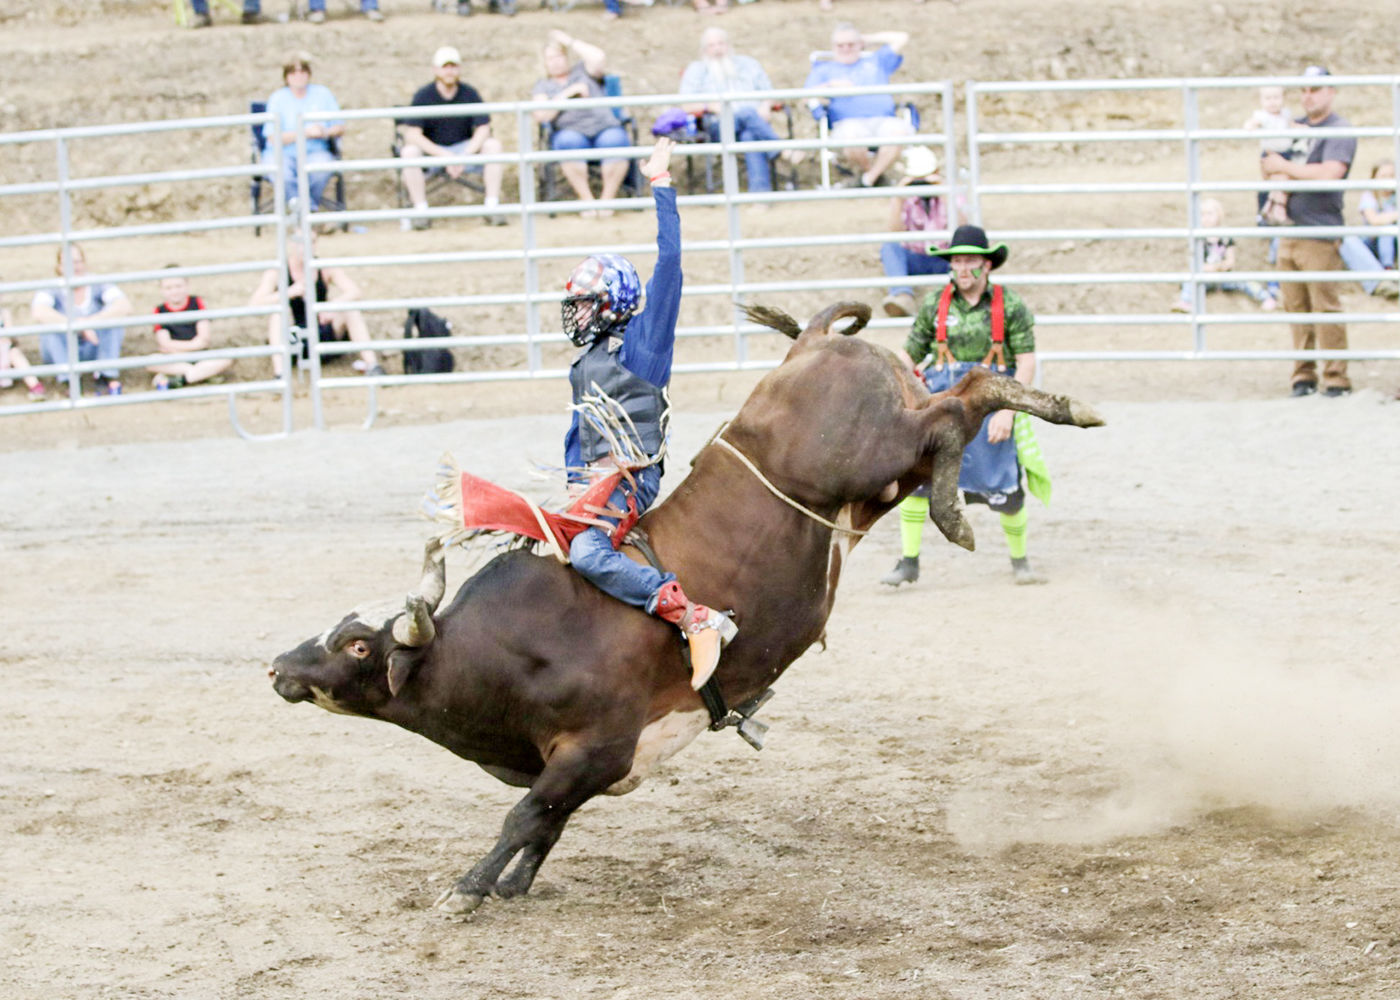 Triple D Rodeo Ranch featuring Bulls and Barrels in Cattaraugus Cattaraugus County oleantimesherald